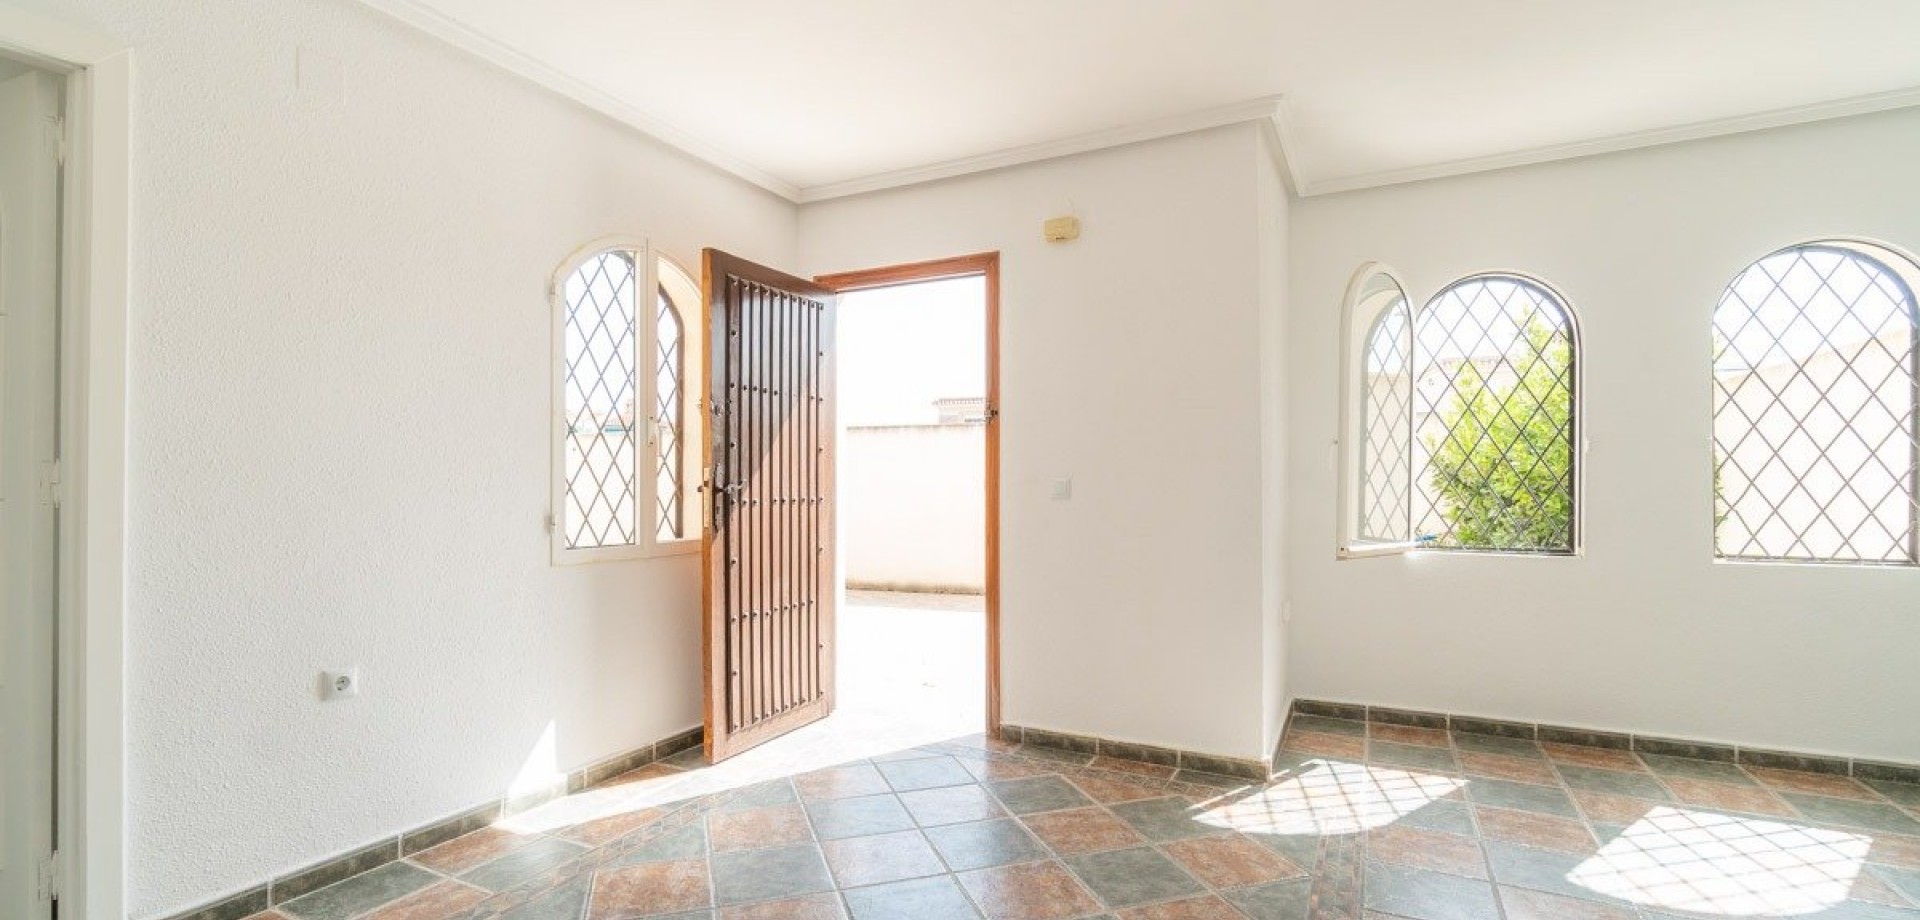 Sale - Terraced house - Torrevieja - Carrefour